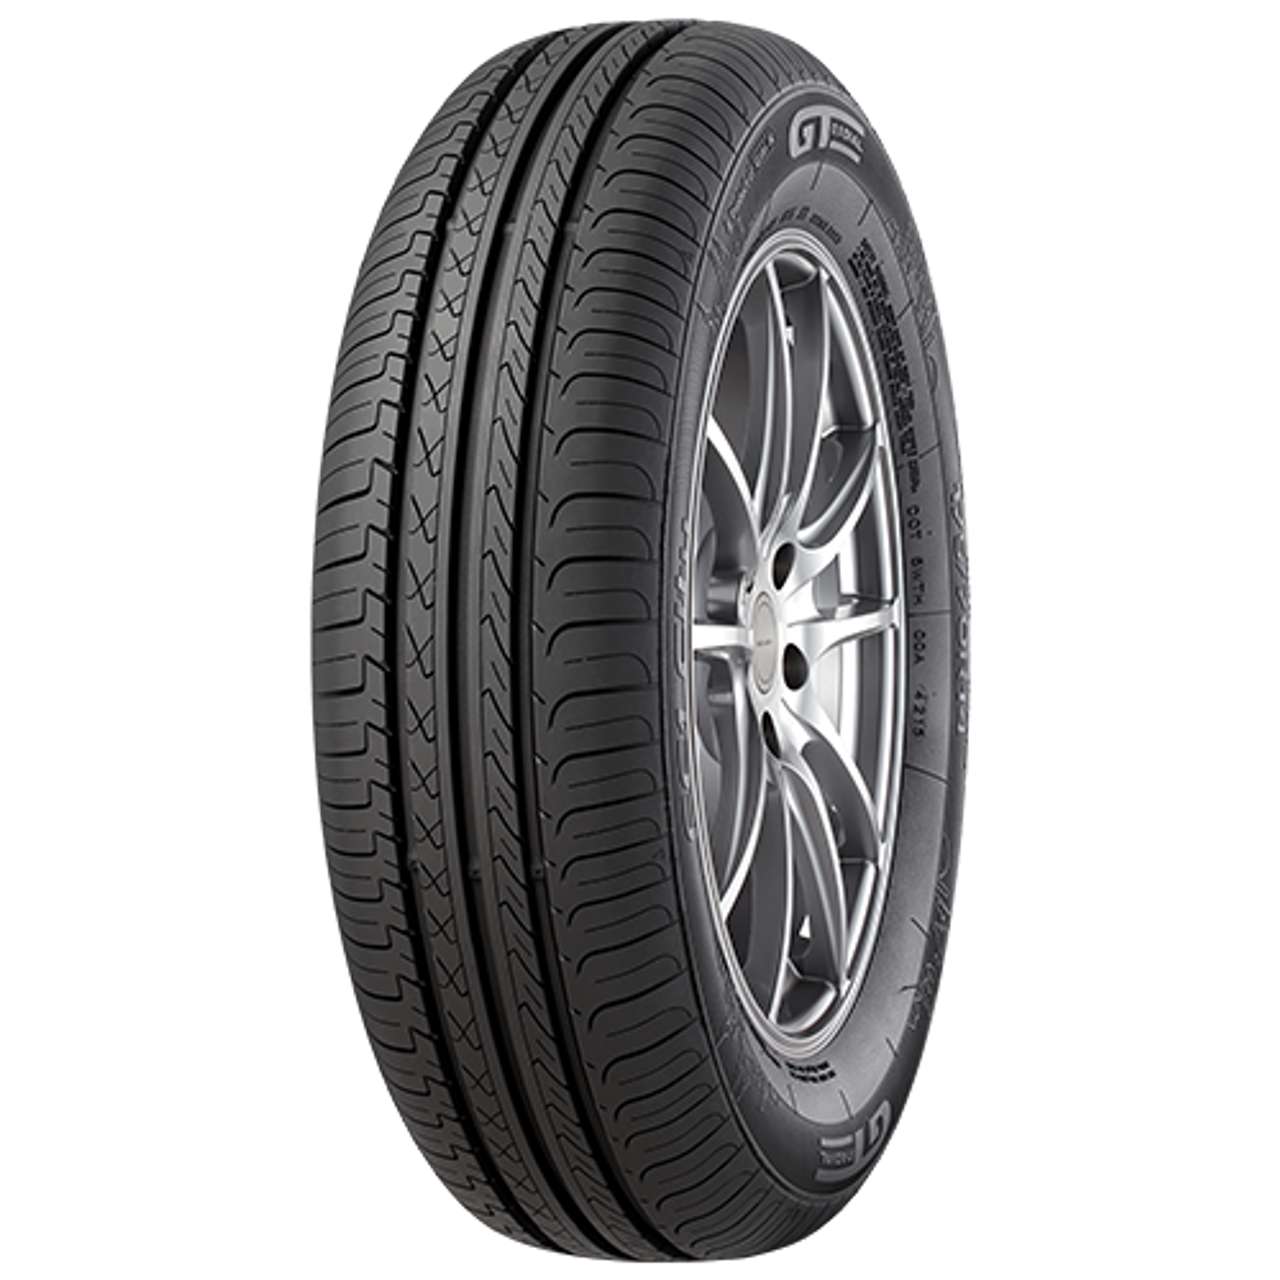 GT-RADIAL FE1 CITY 185/65R14 86H BSW